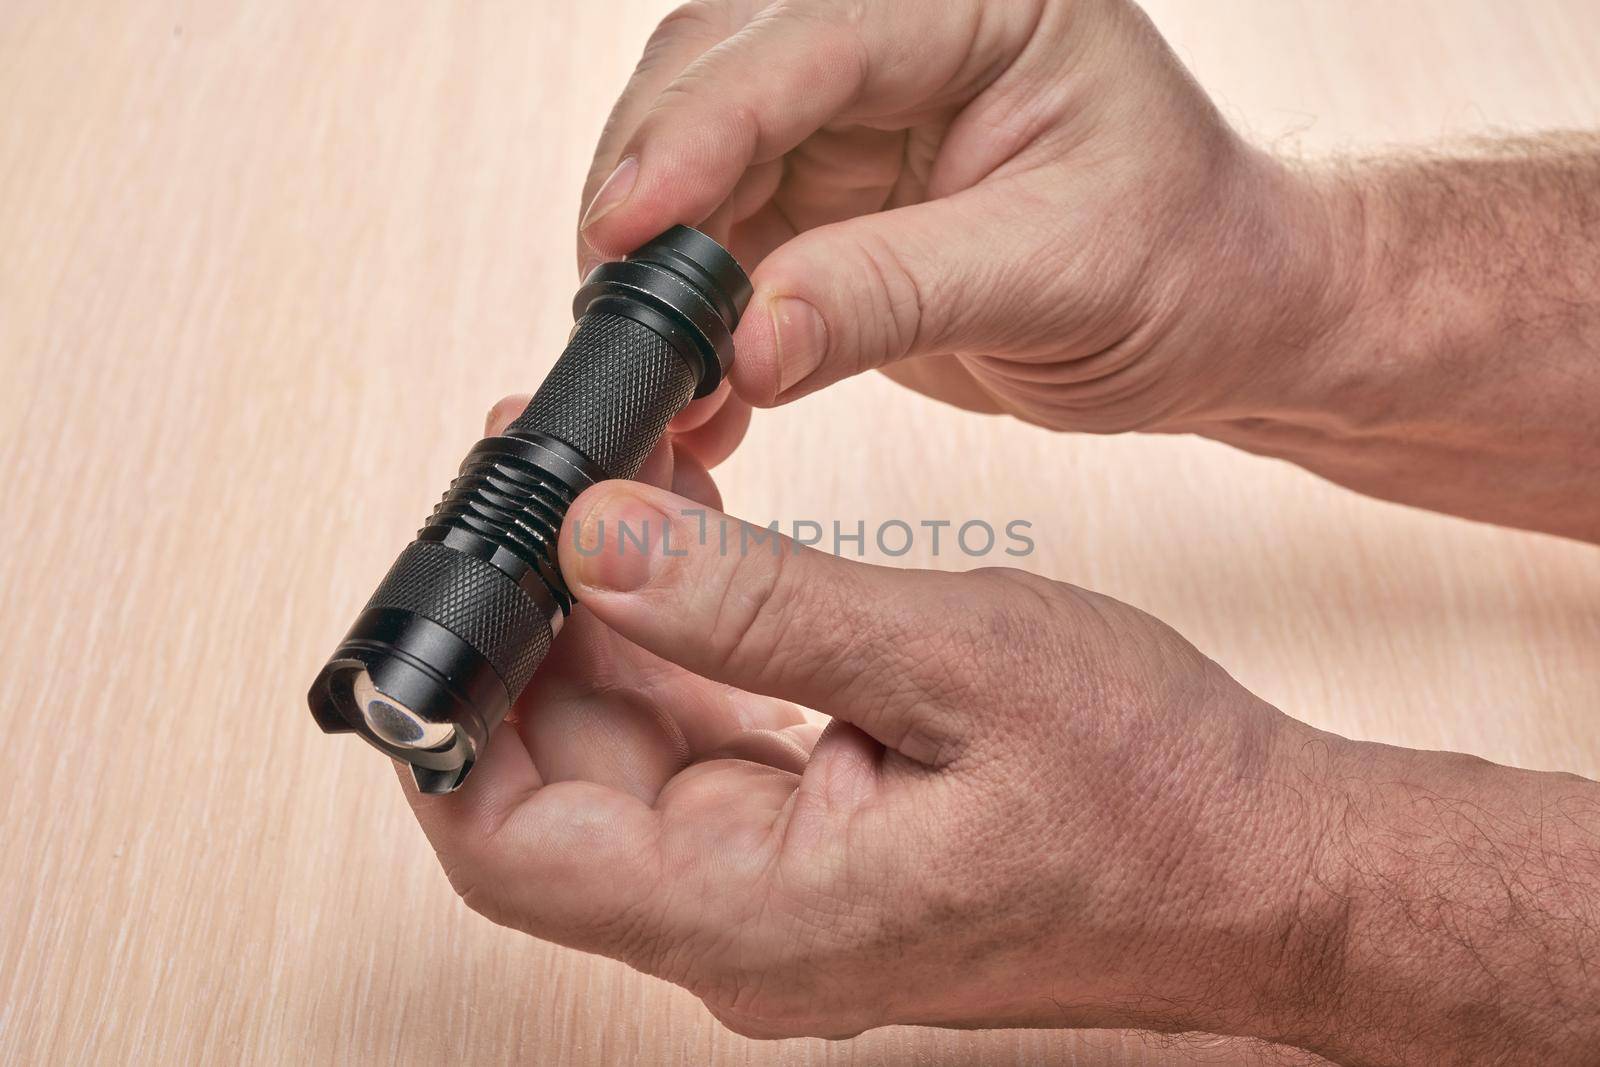 Hands hold a small black flashlight to replace the used battery. Close up